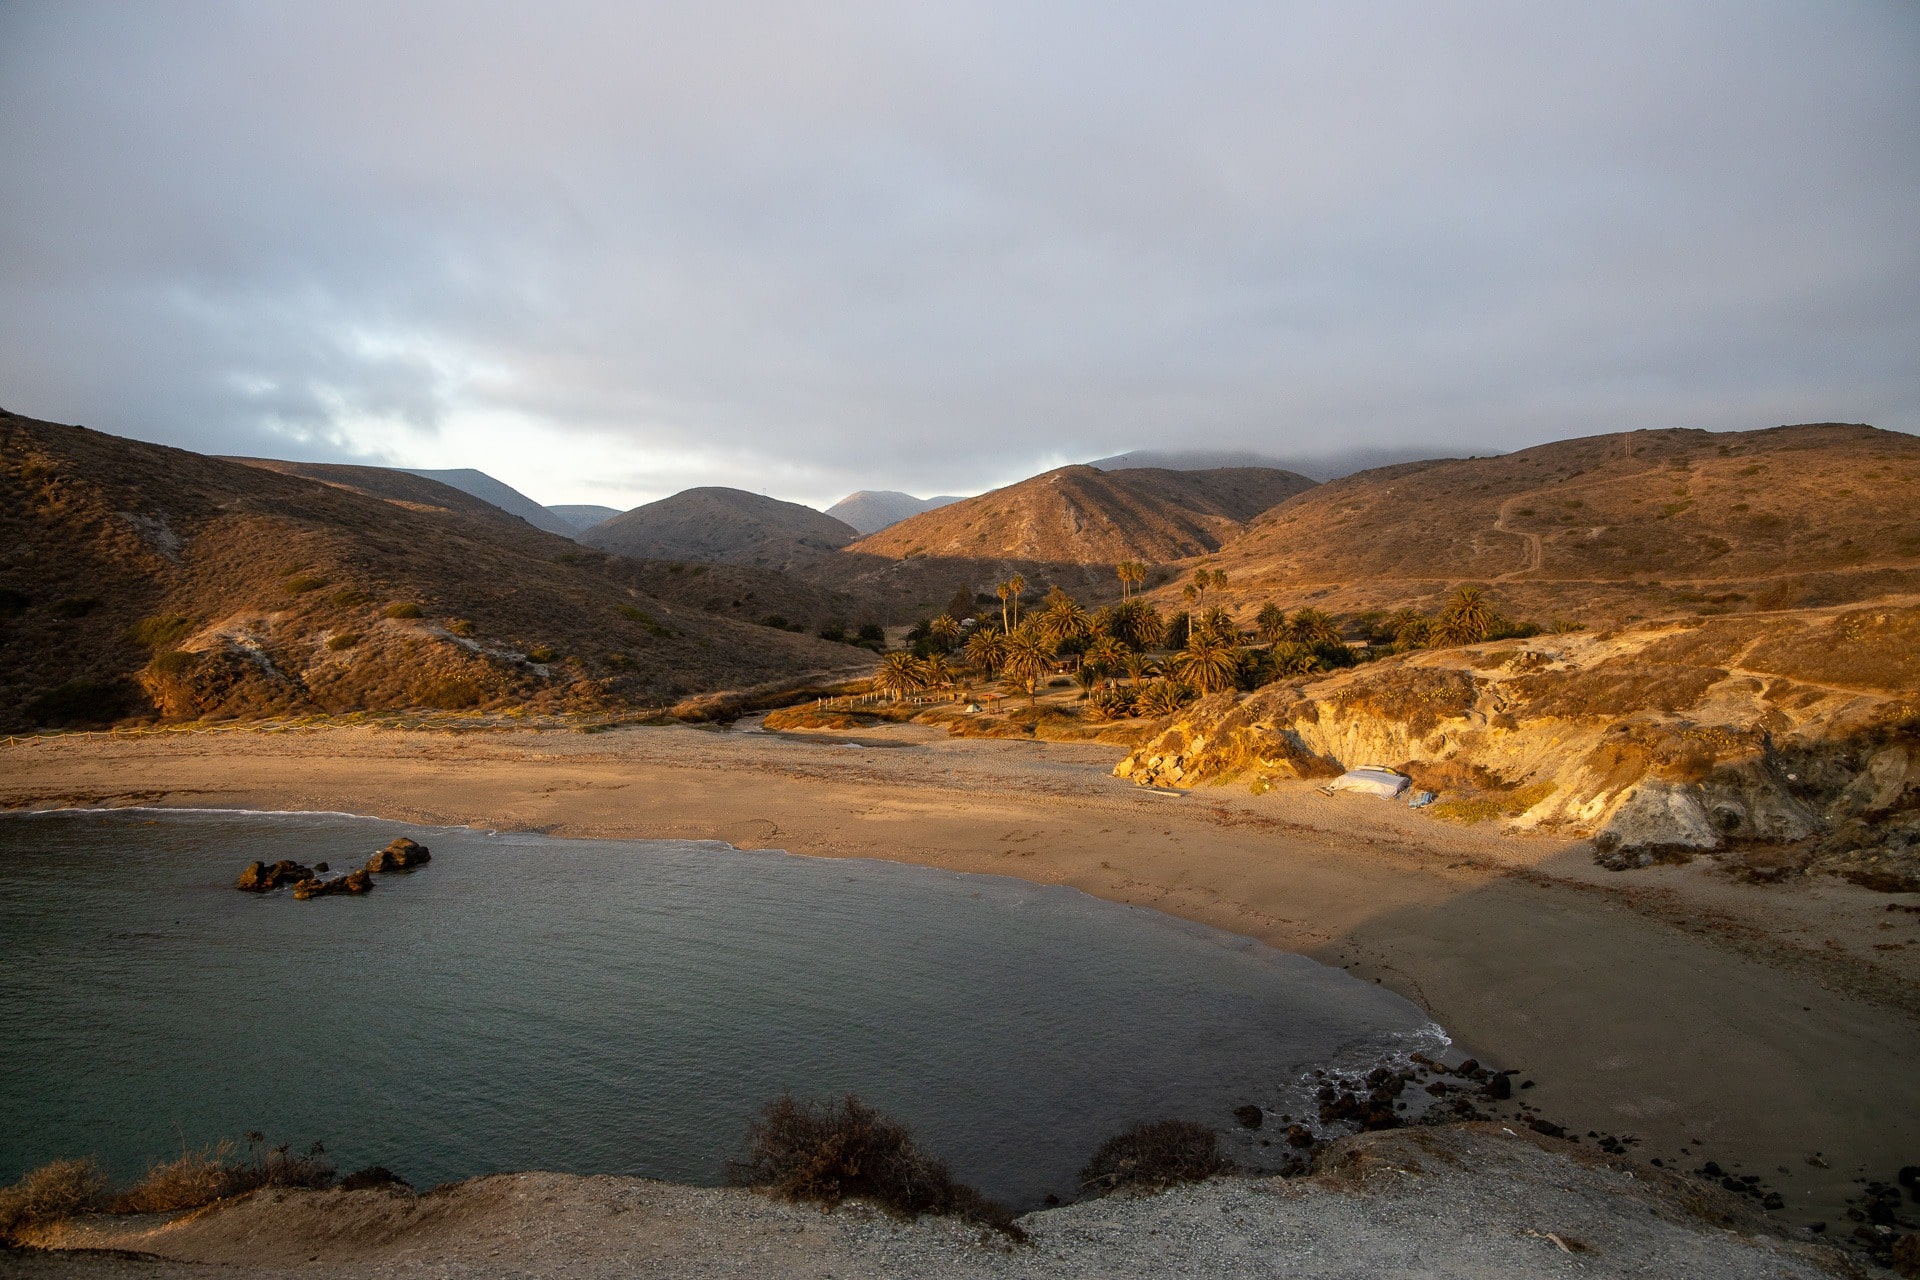 Little Harbor Campground on Catalina Island // Plan a backpacking trip on the Trans-Catalina Trail on Catalina Island with this trail guide with tips on the best campsites, water availability, gear & more